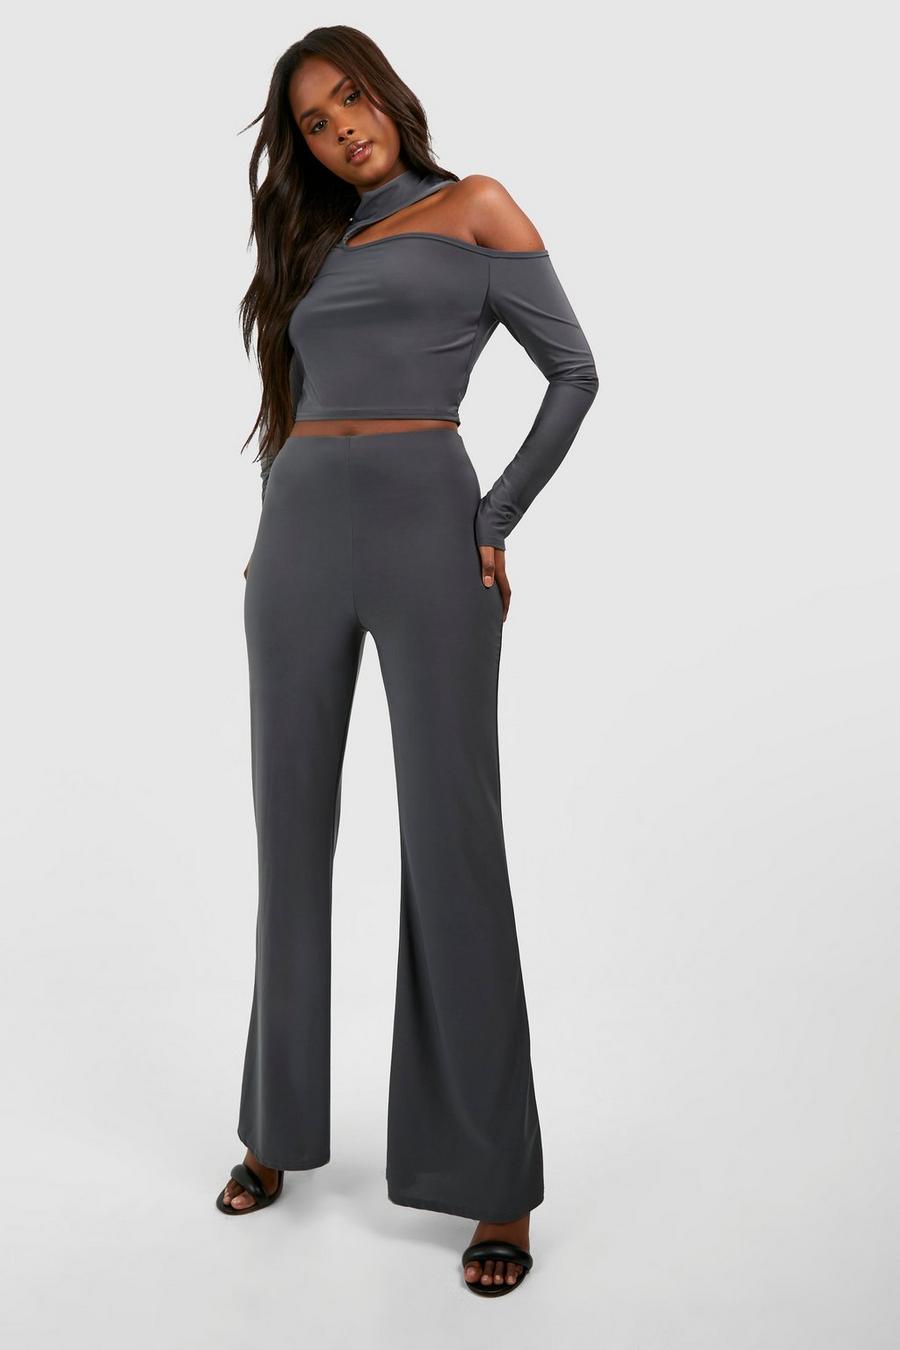 Slate High Neck Cut Out Long Sleeve Top & Flared Pants image number 1